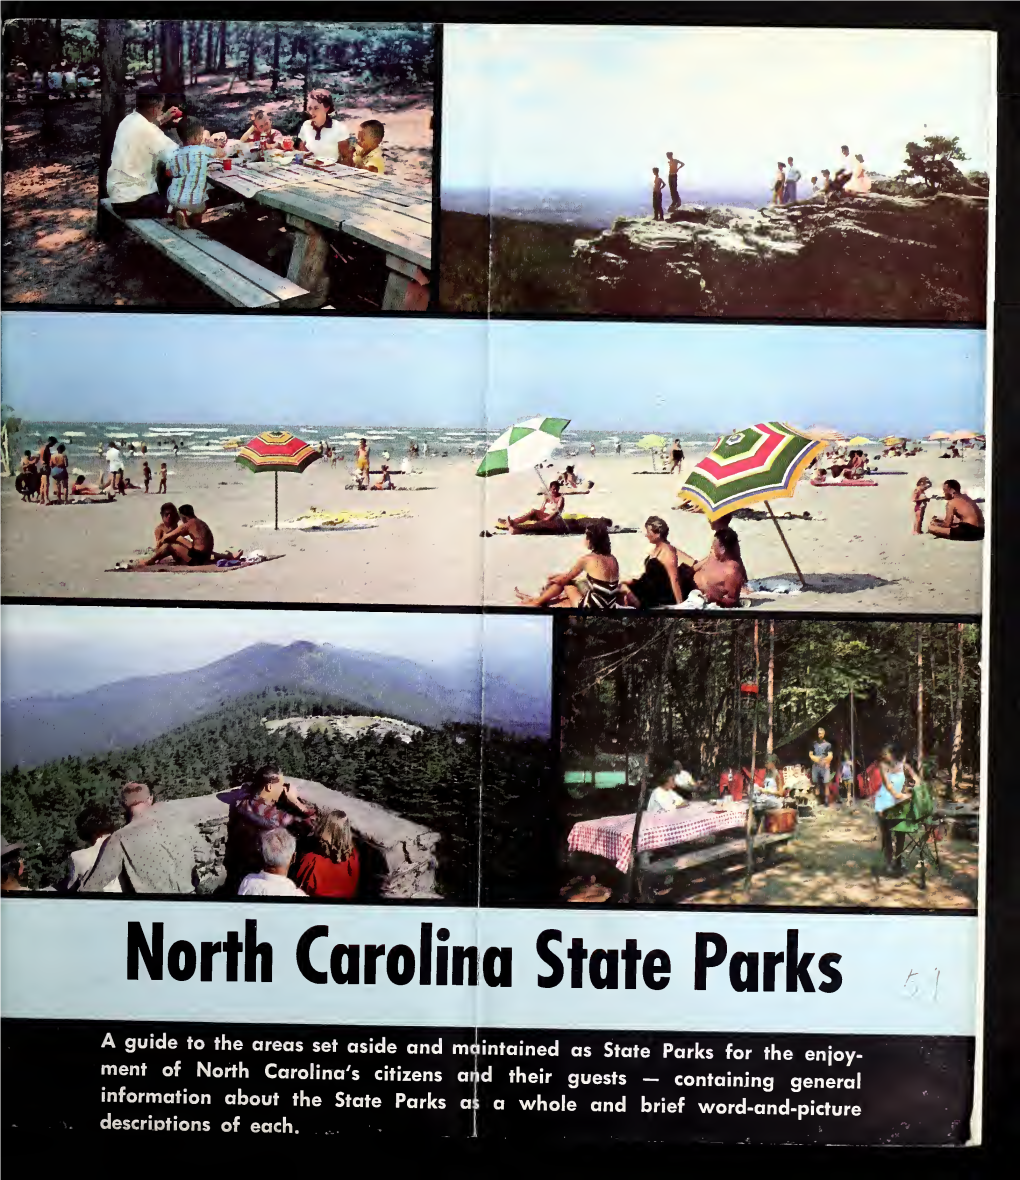 How to Enjoy Your North Carolina State Parks